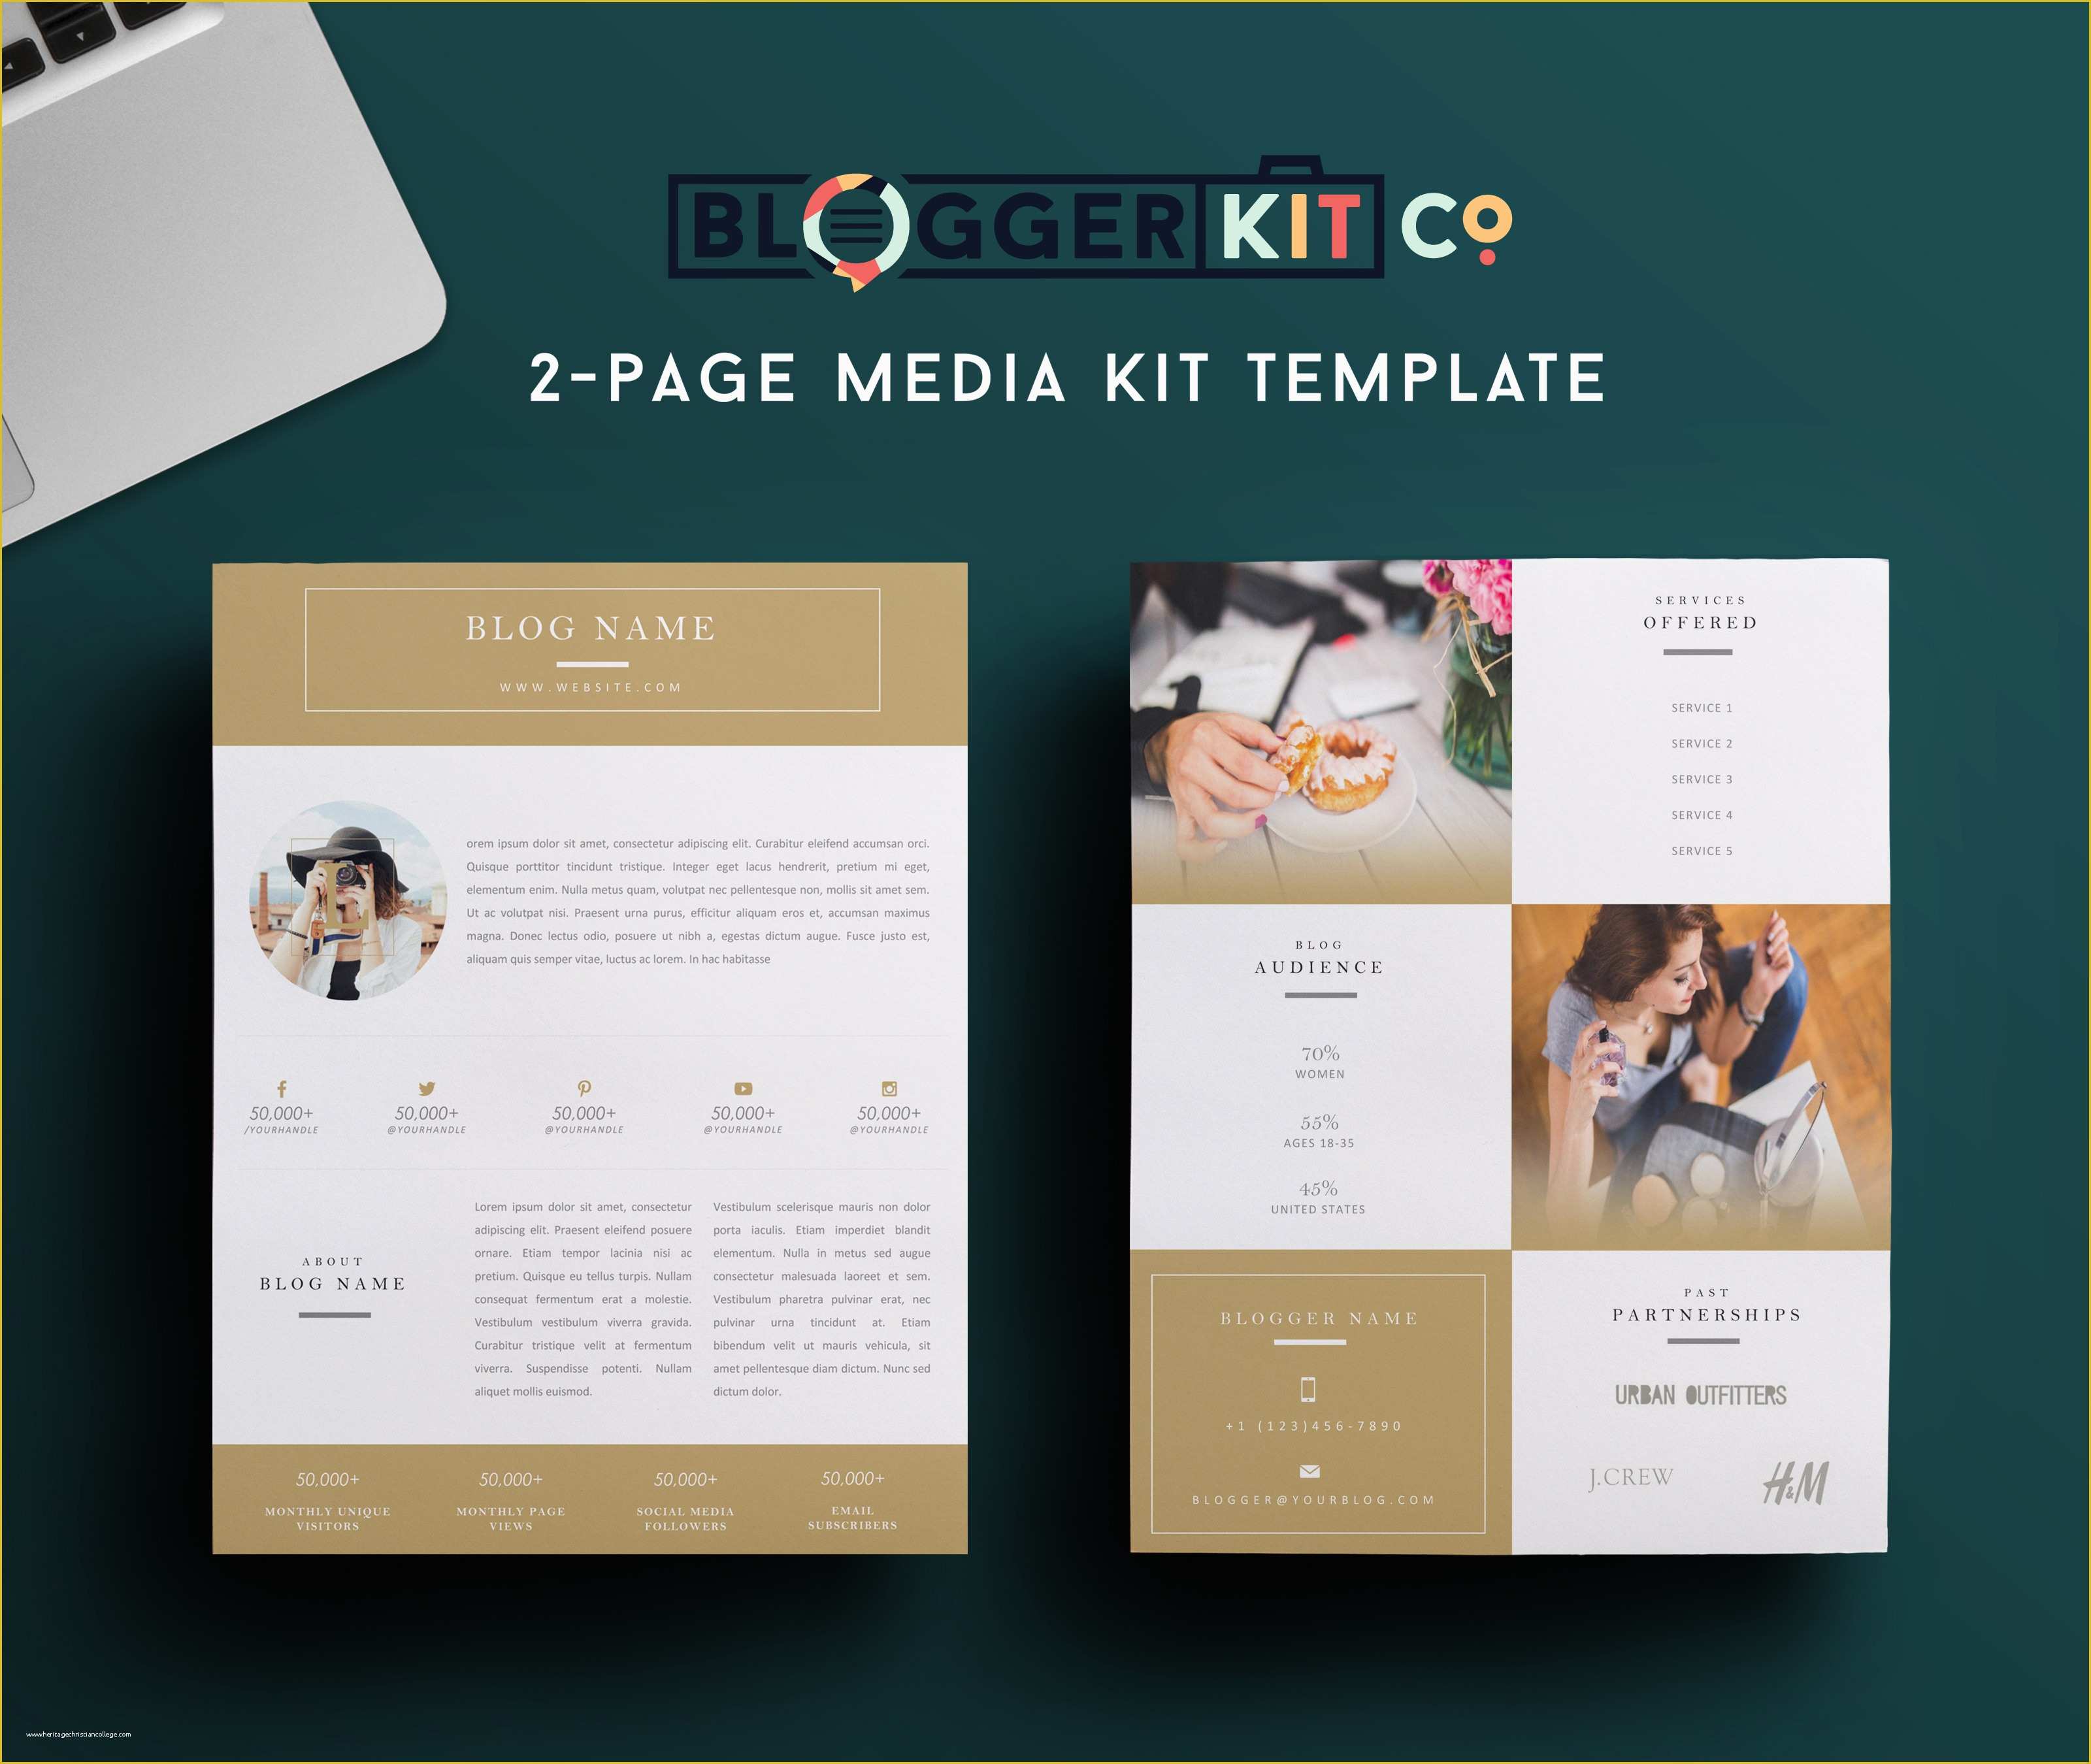 Musician Press Kit Template Free Of Beauty Blogger Iii Gold